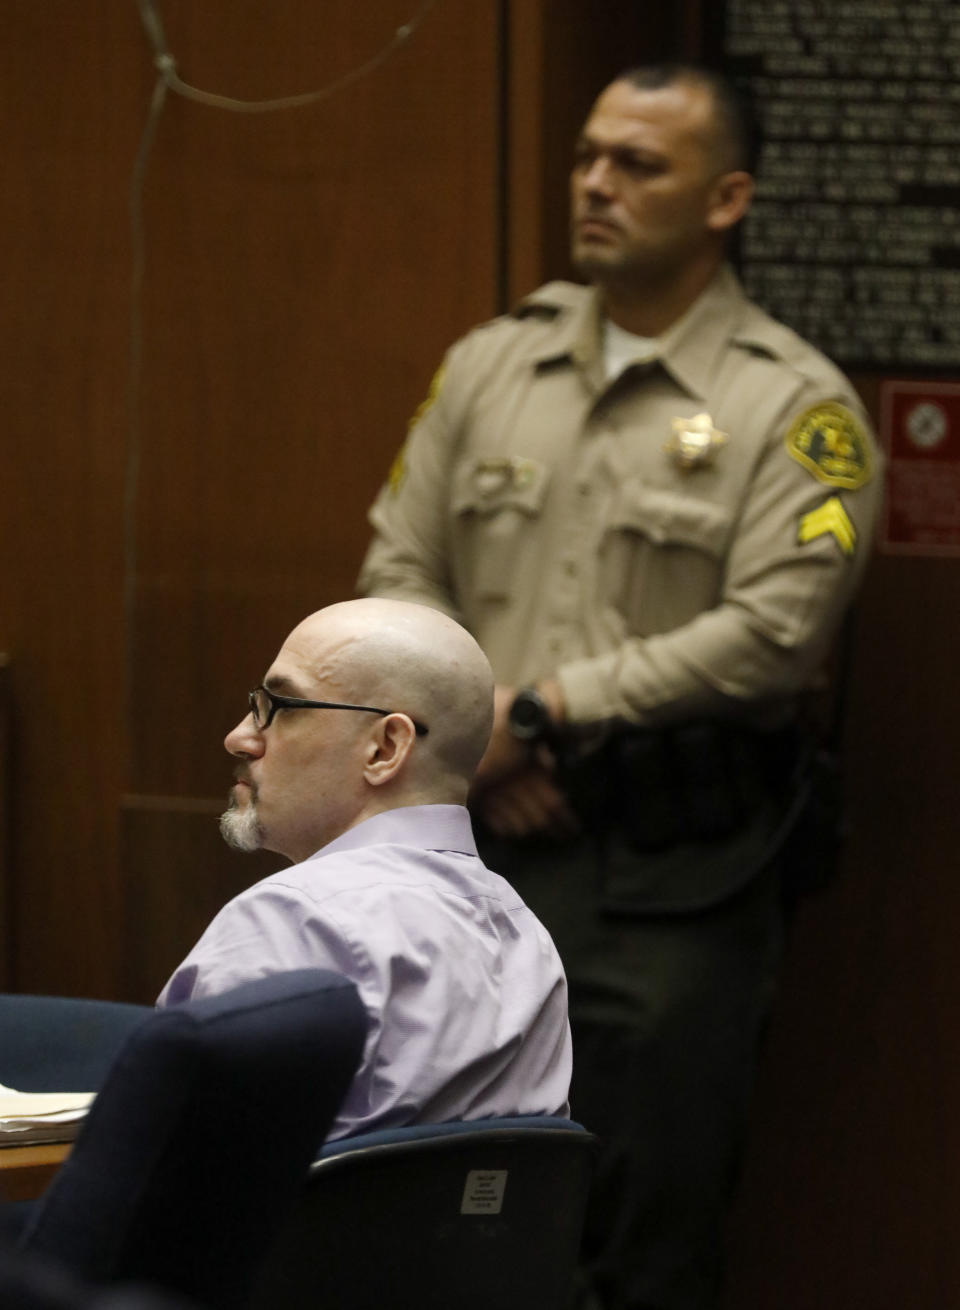 FILE - In this May 29, 2019, file photo, Michael Gargiulo, sitting, listens to the testimony of Ashton Kutcher during Gargiulo's murder trial at Los Angeles Superior Court. Gargiulo has pleaded not guilty to two counts of murder and an attempted-murder charge stemming from attacks in the Los Angeles area between 2001 and 2008, including the death of Kutcher's former girlfriend, 22-year-old Ashley Ellerin. (Genaro Molina/Los Angeles Times via AP, Pool, File)